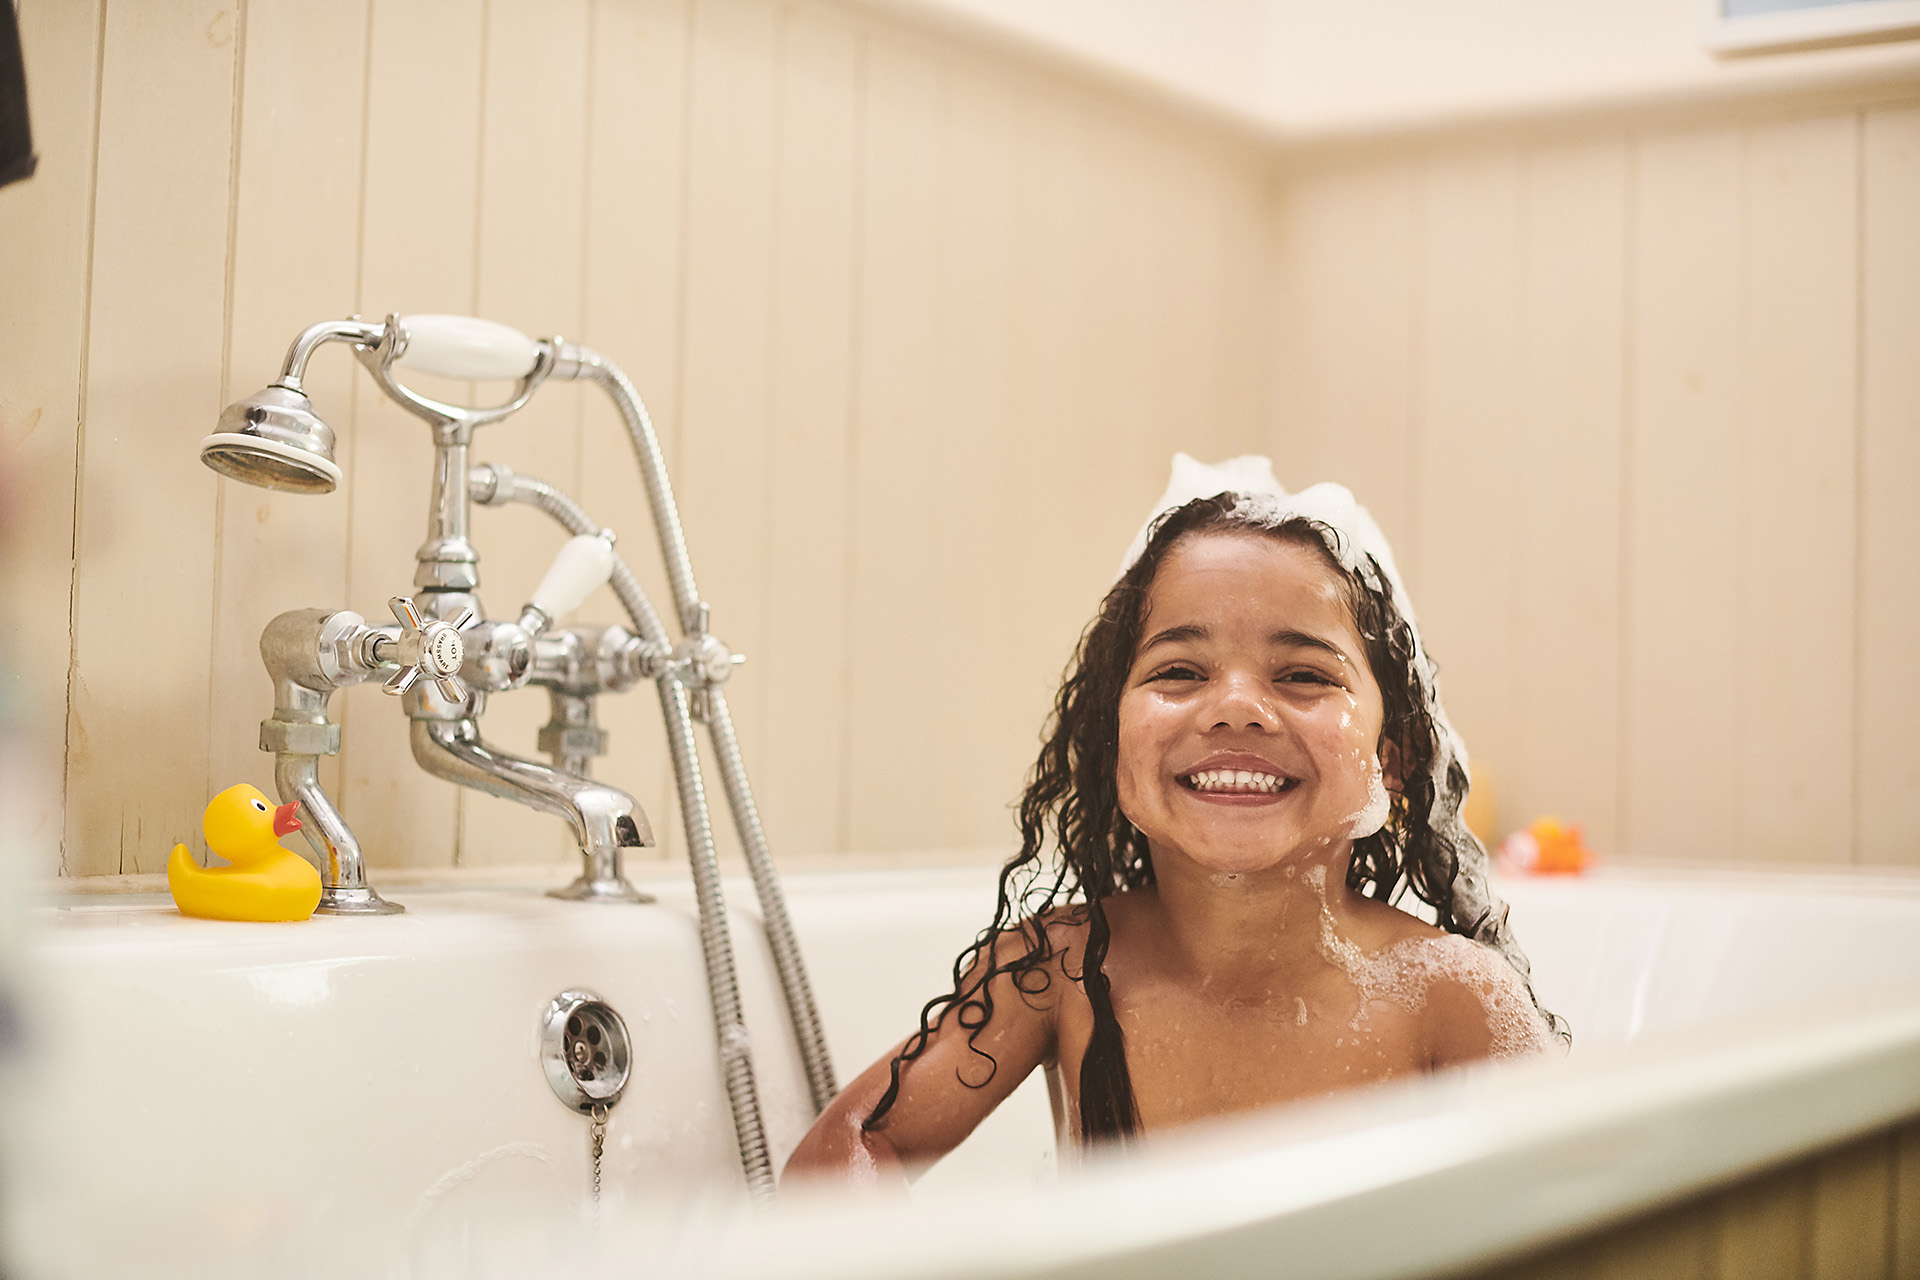 A child cheekily grinning in the bath